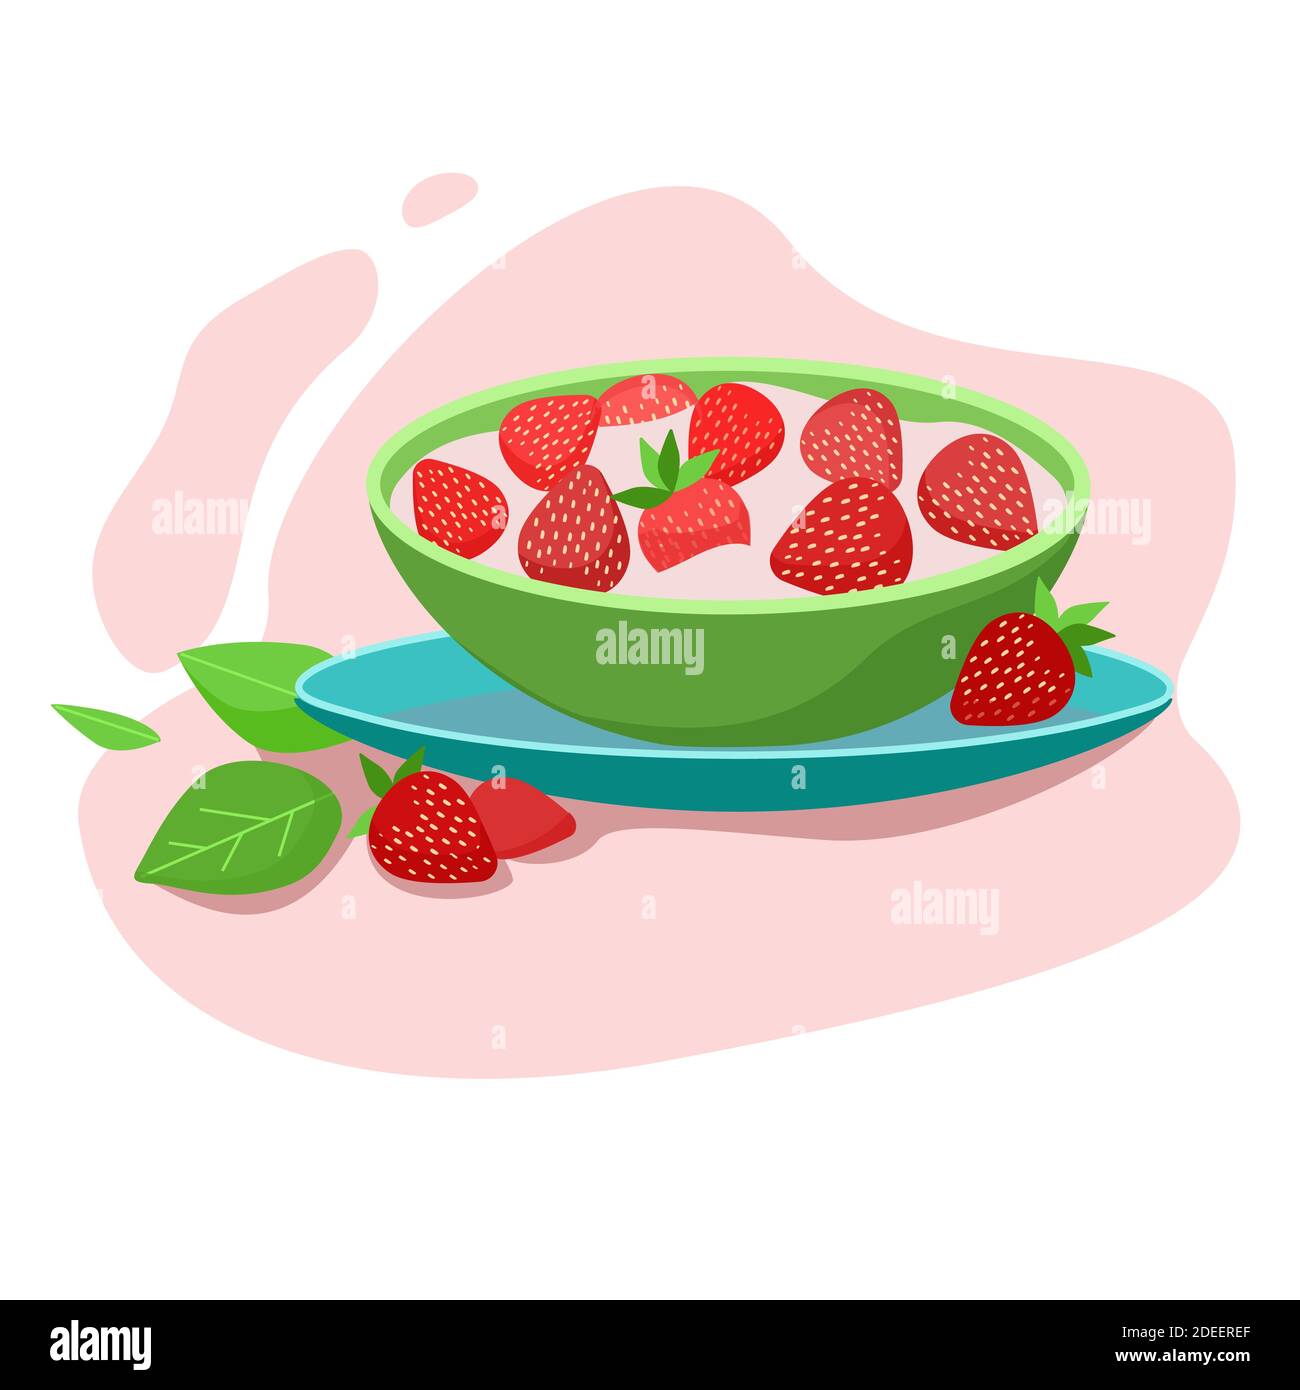 Strawberry desert in a plate. Fruit and vegetable salad. Stock Vector